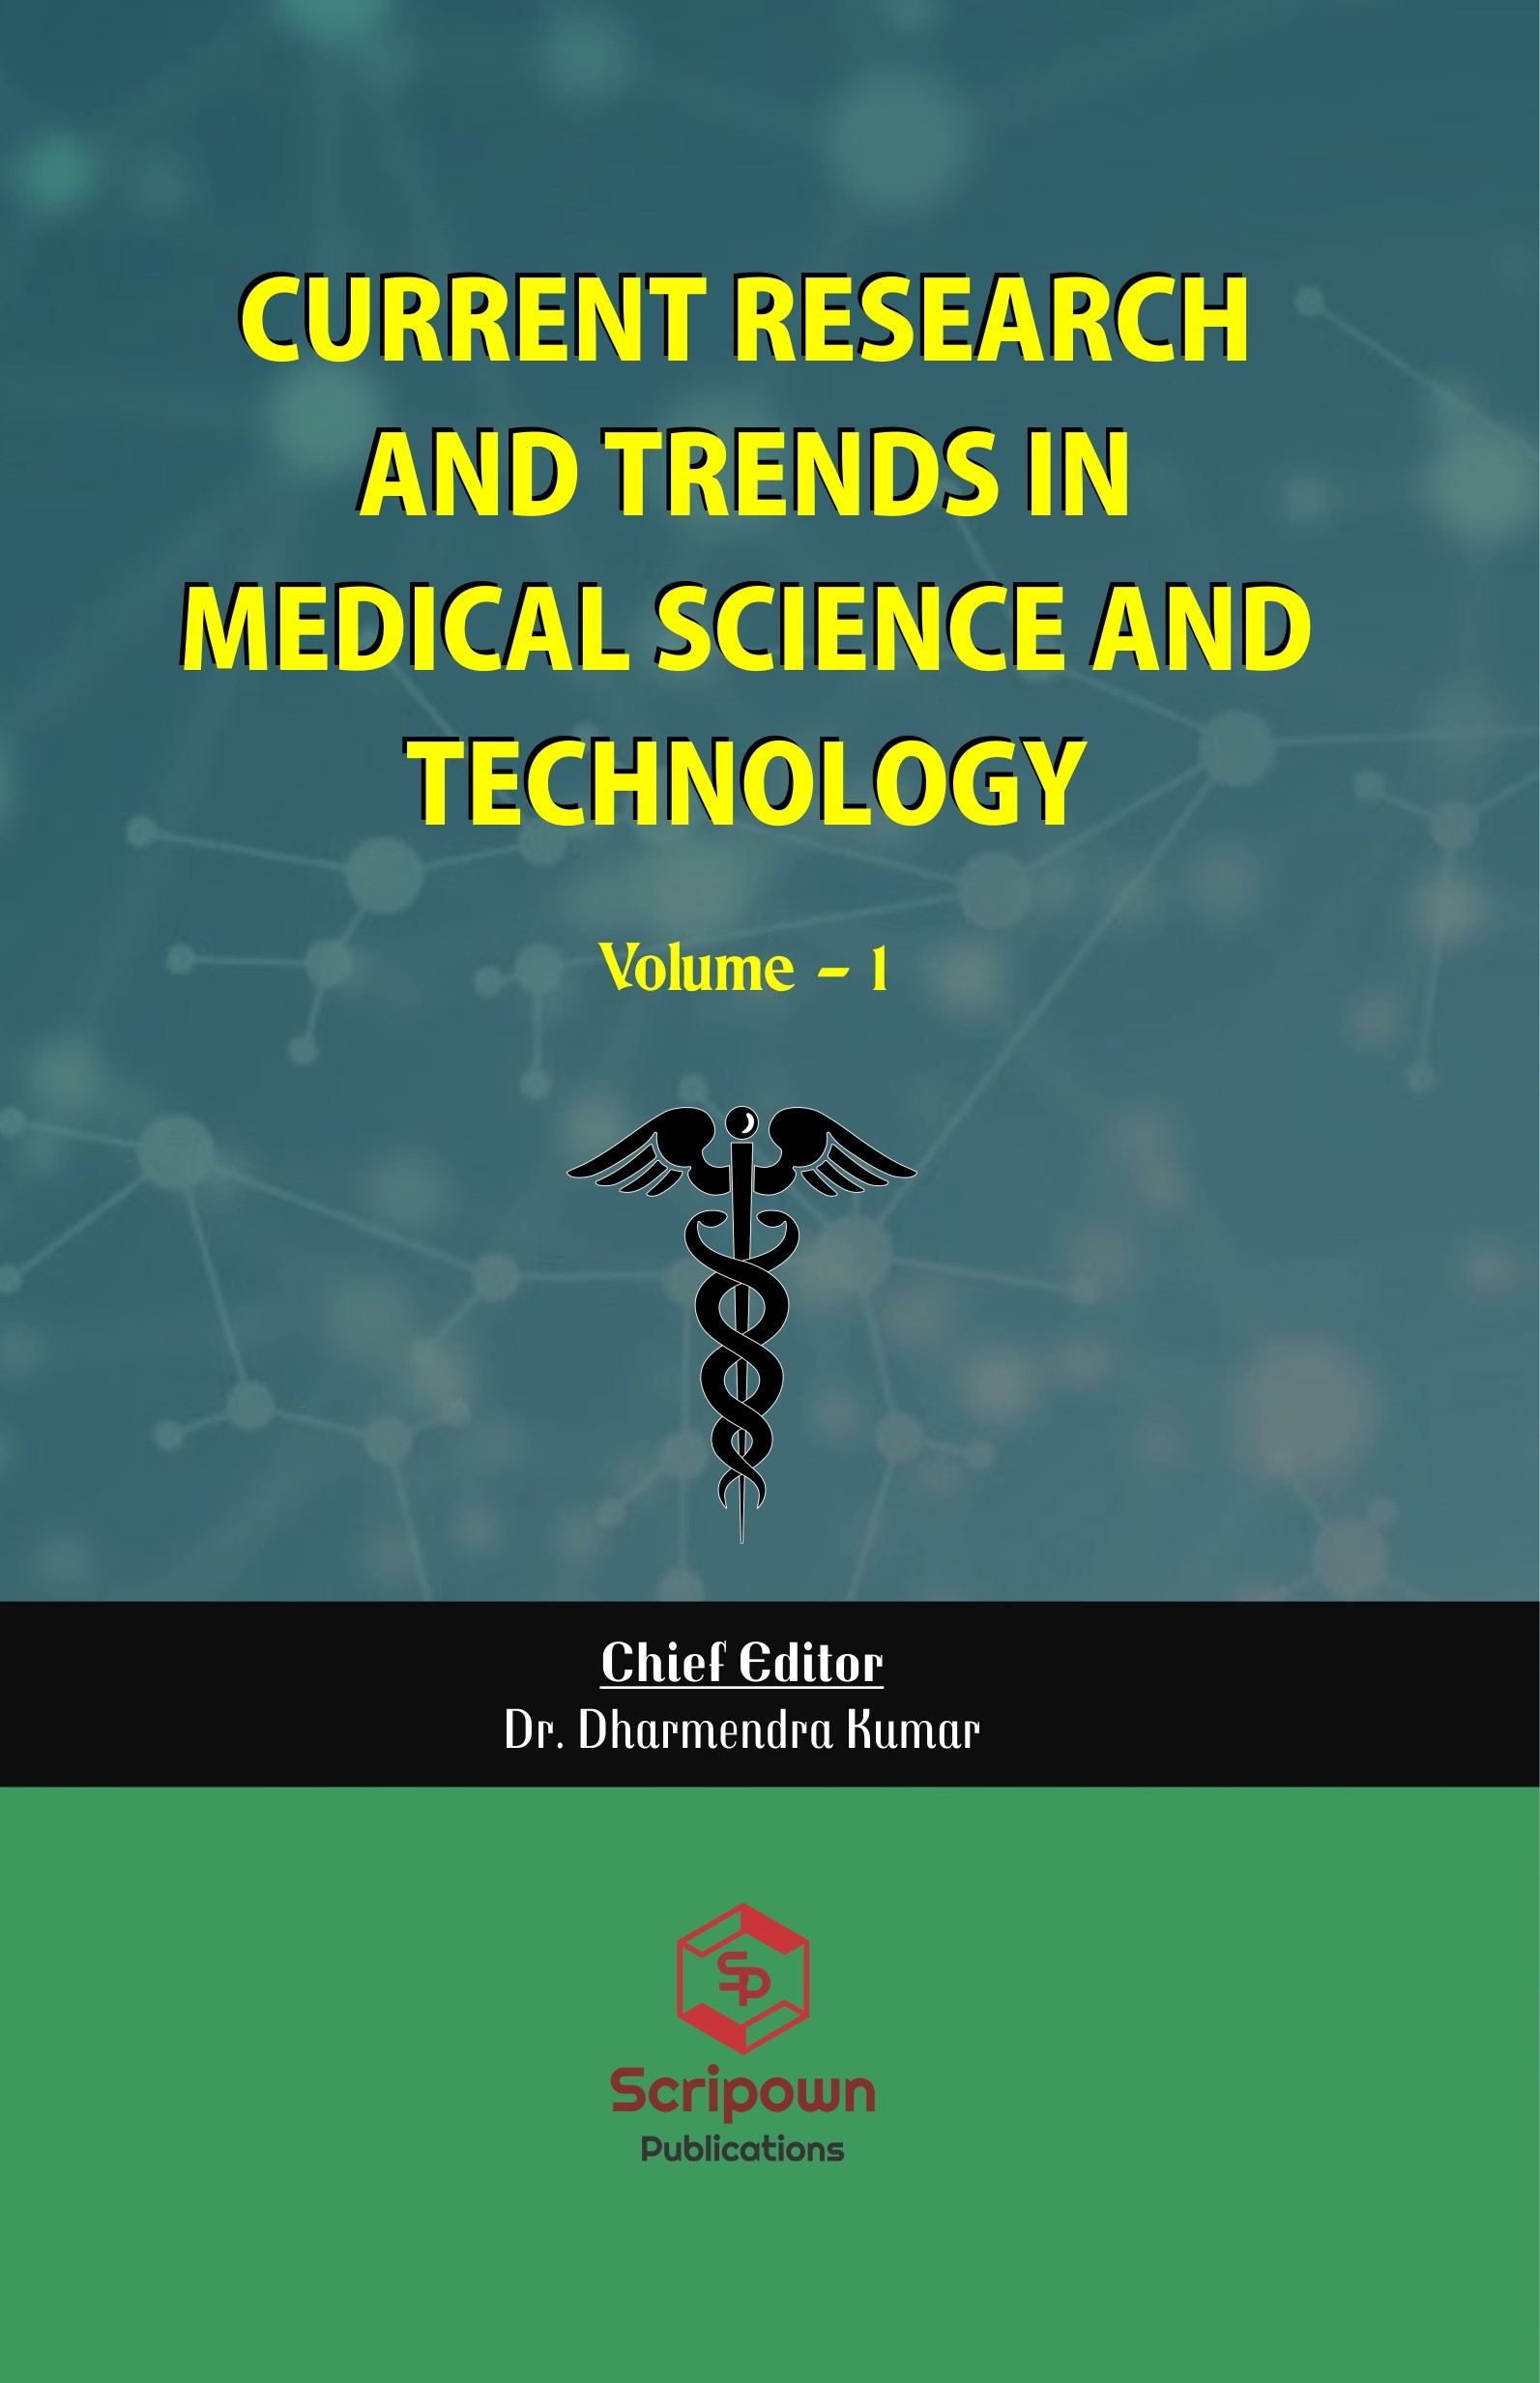 Current Research and Trends in Medical Science and Technology